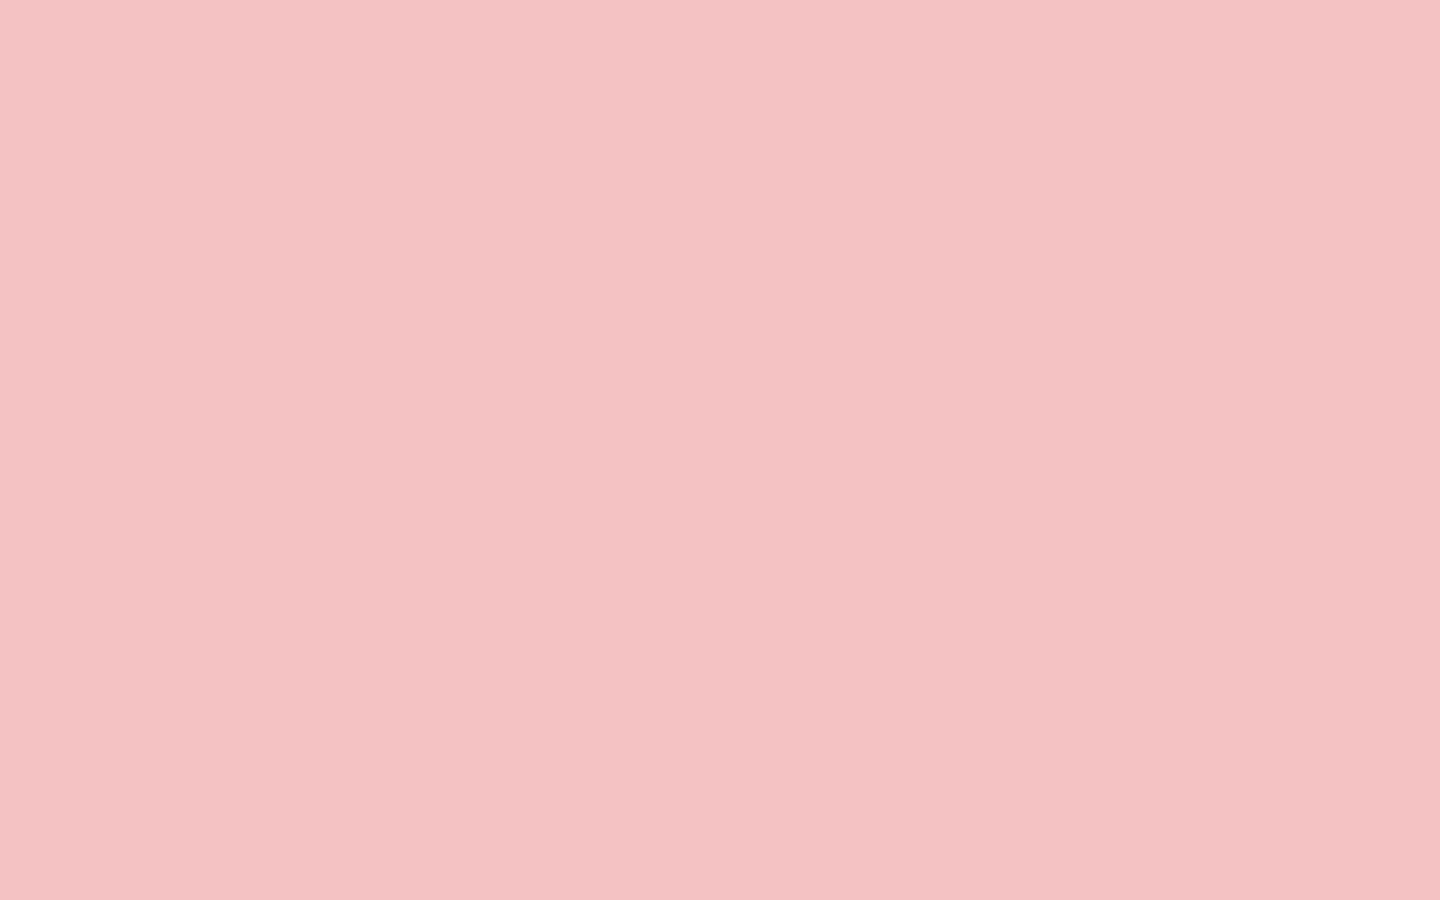 Free 1440x900 resolution Baby Pink solid color background view and